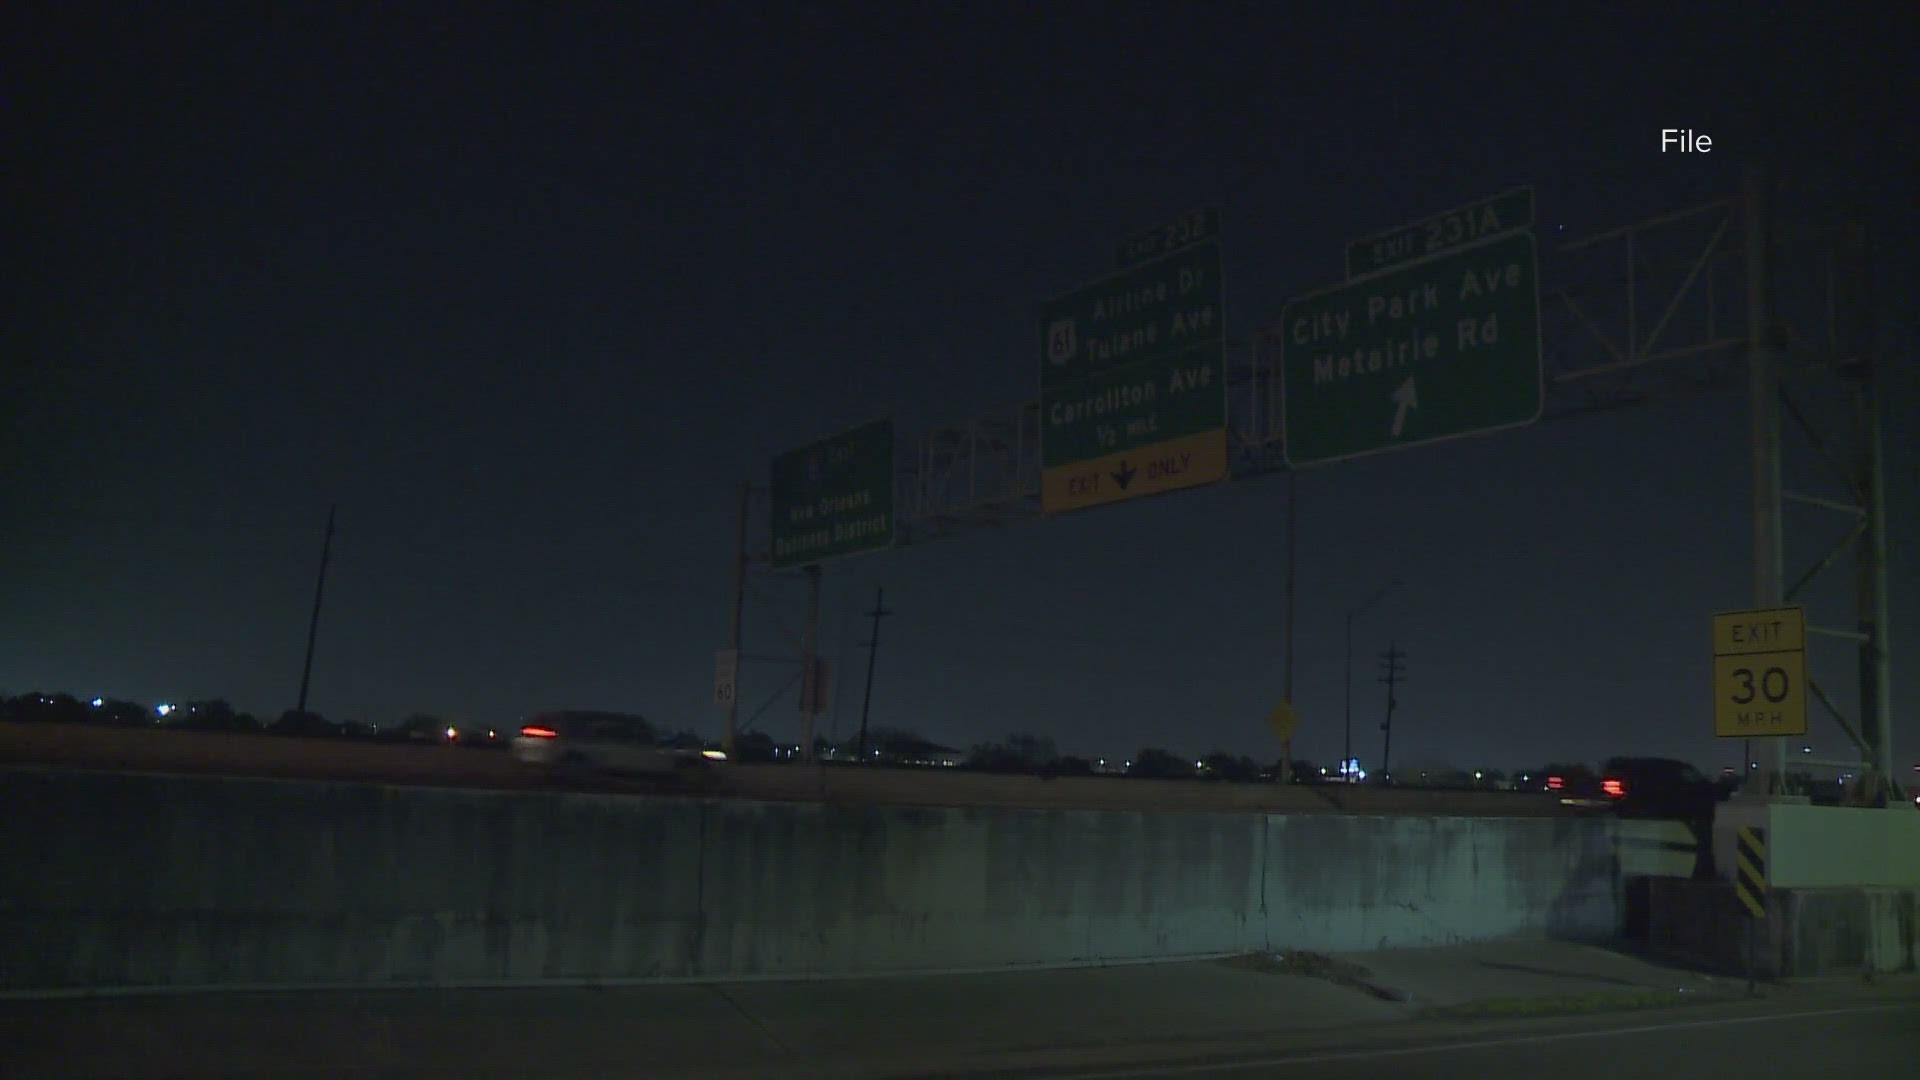 The city, along with help from DOTD, is working to fix some of the lights that are out on the interstate.